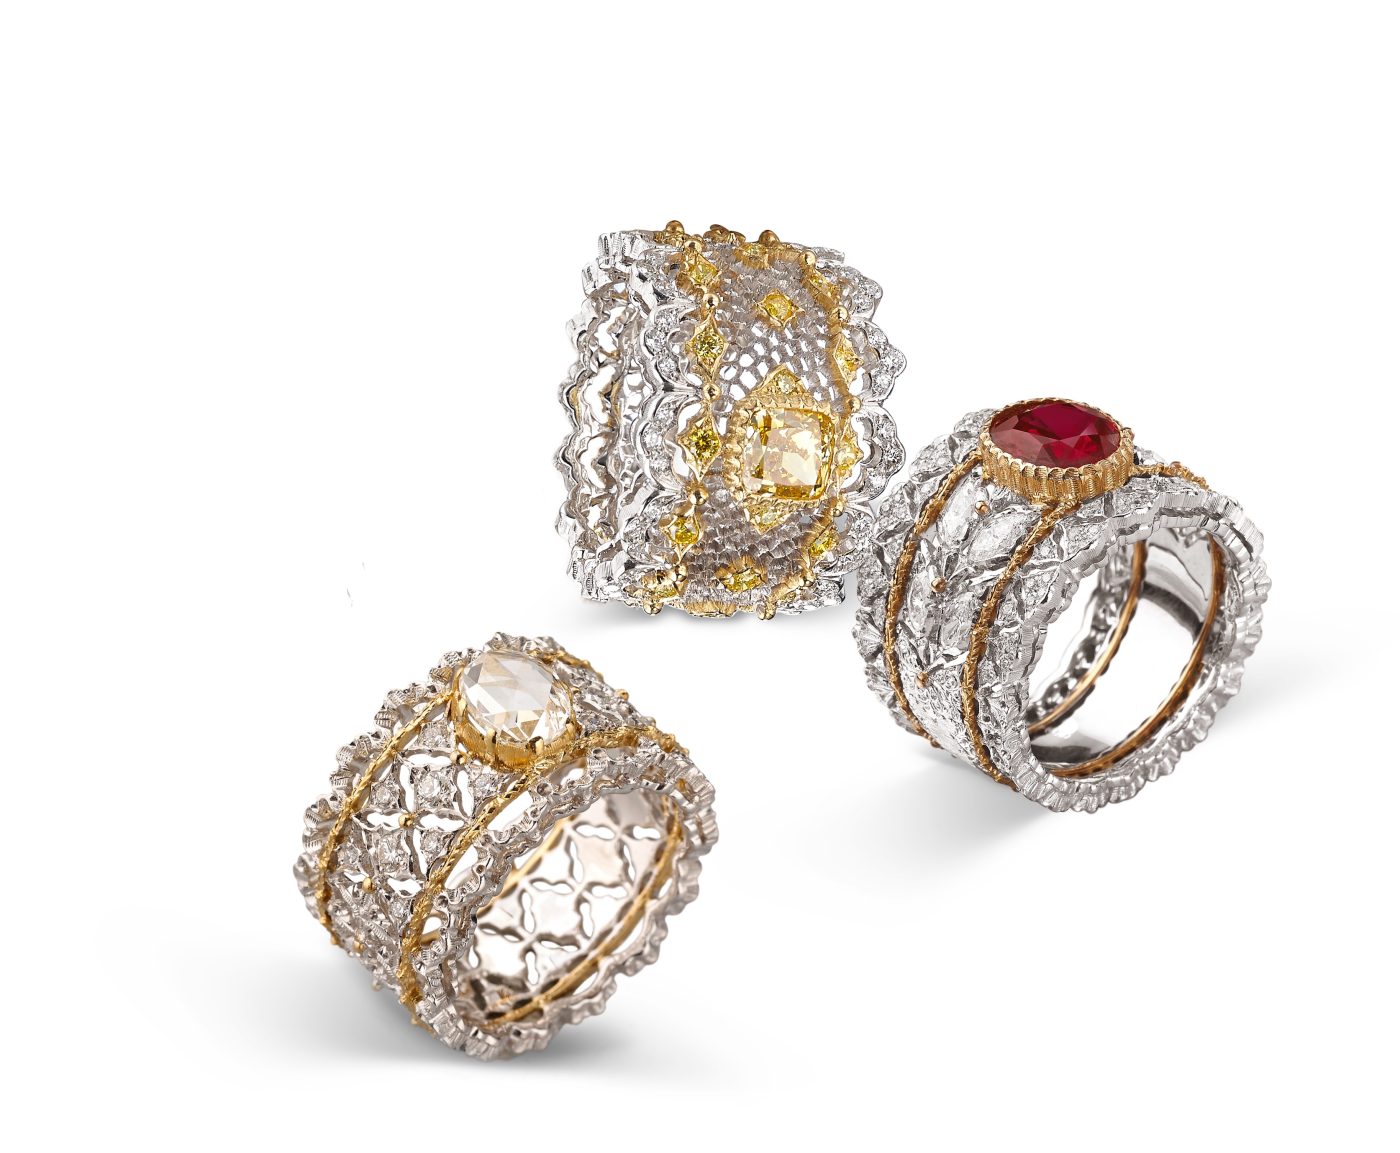 Band rings in different colors of gold set with, from left, a rose-cut white diamond, a fancy yellow diamond and a ruby.